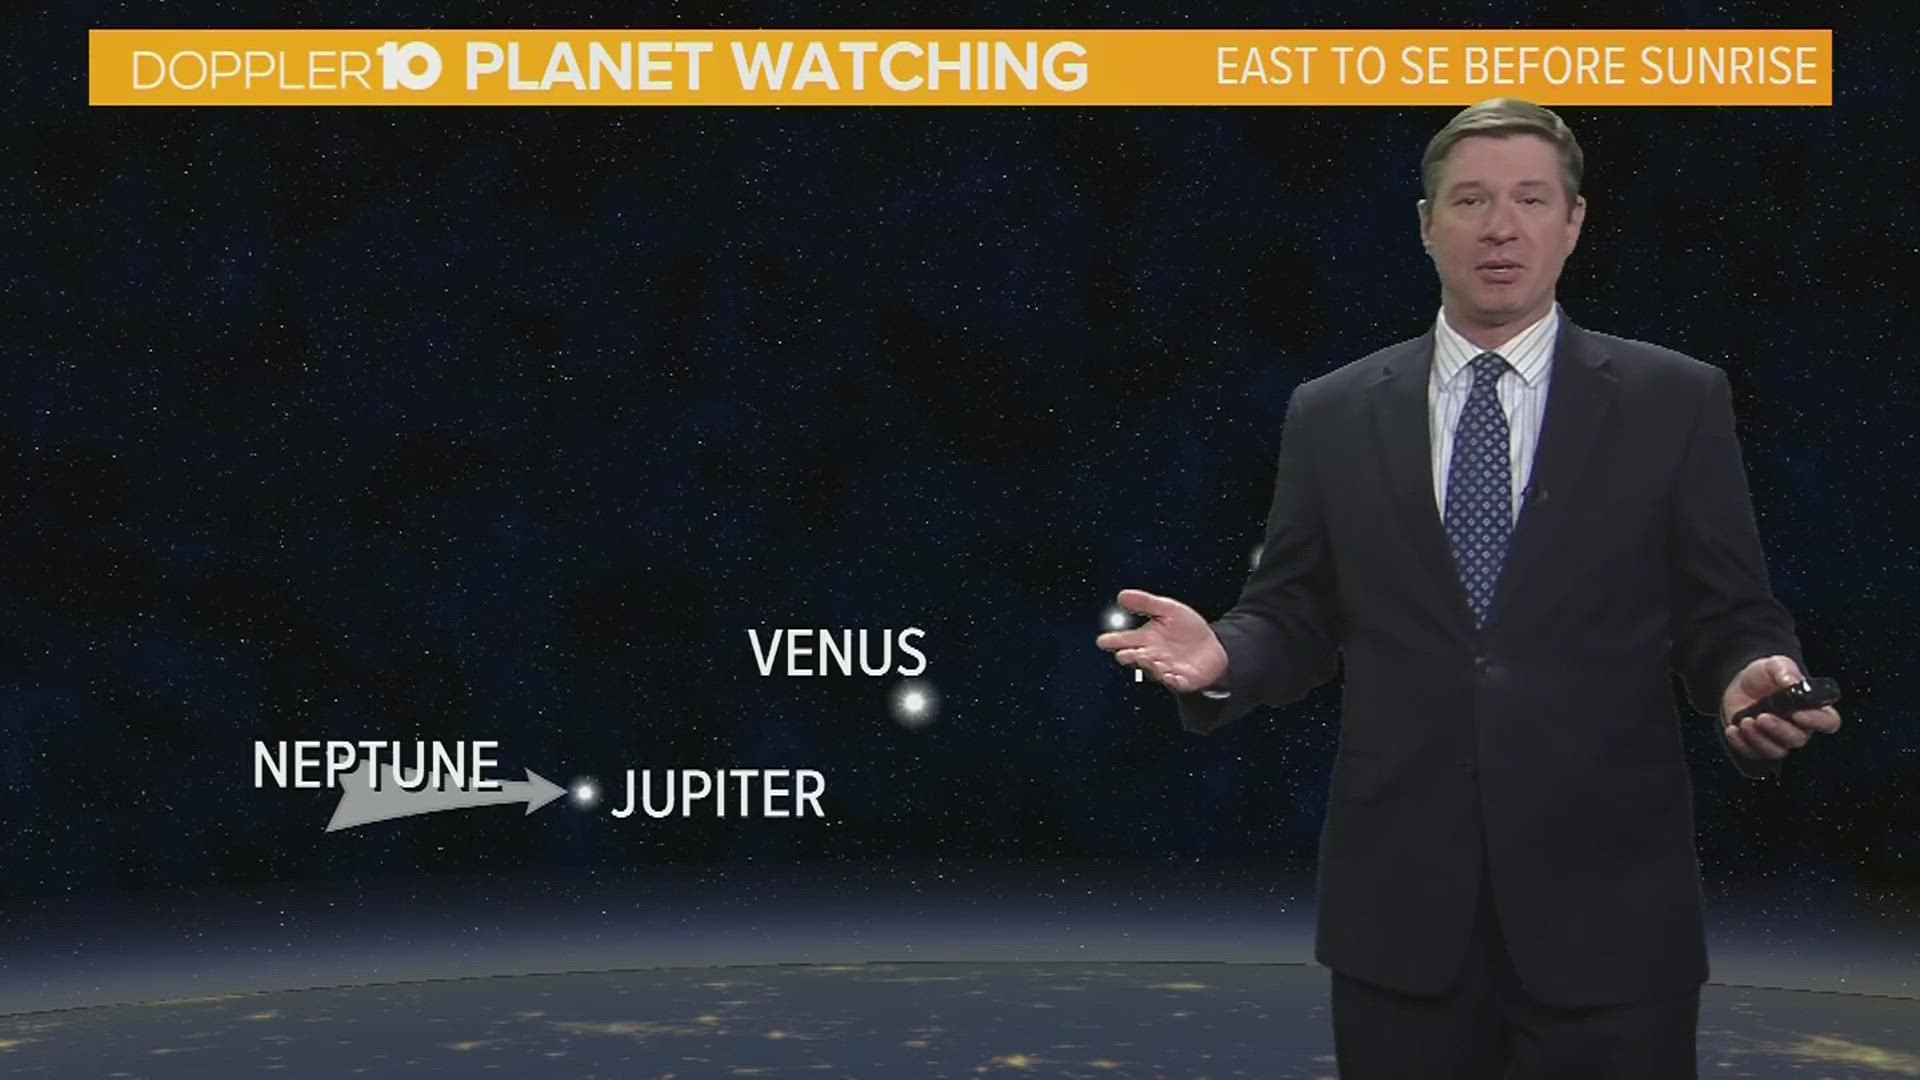 If you’re out early in the morning you can find four of the five “naked eye” planets.